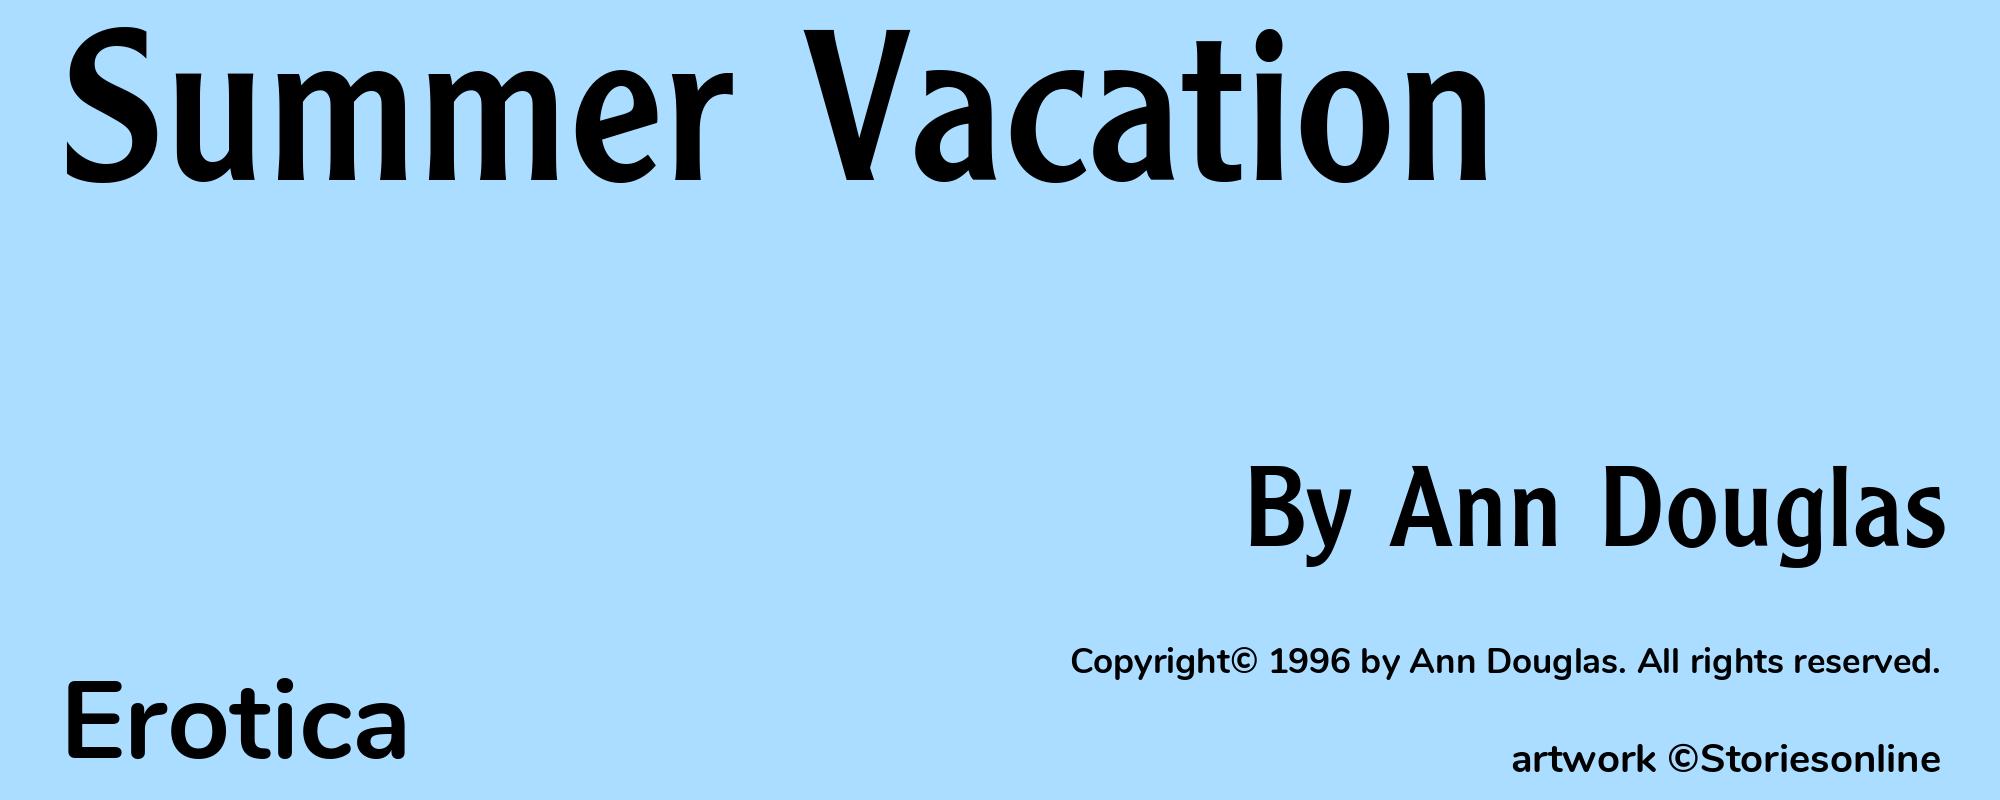 Summer Vacation - Cover